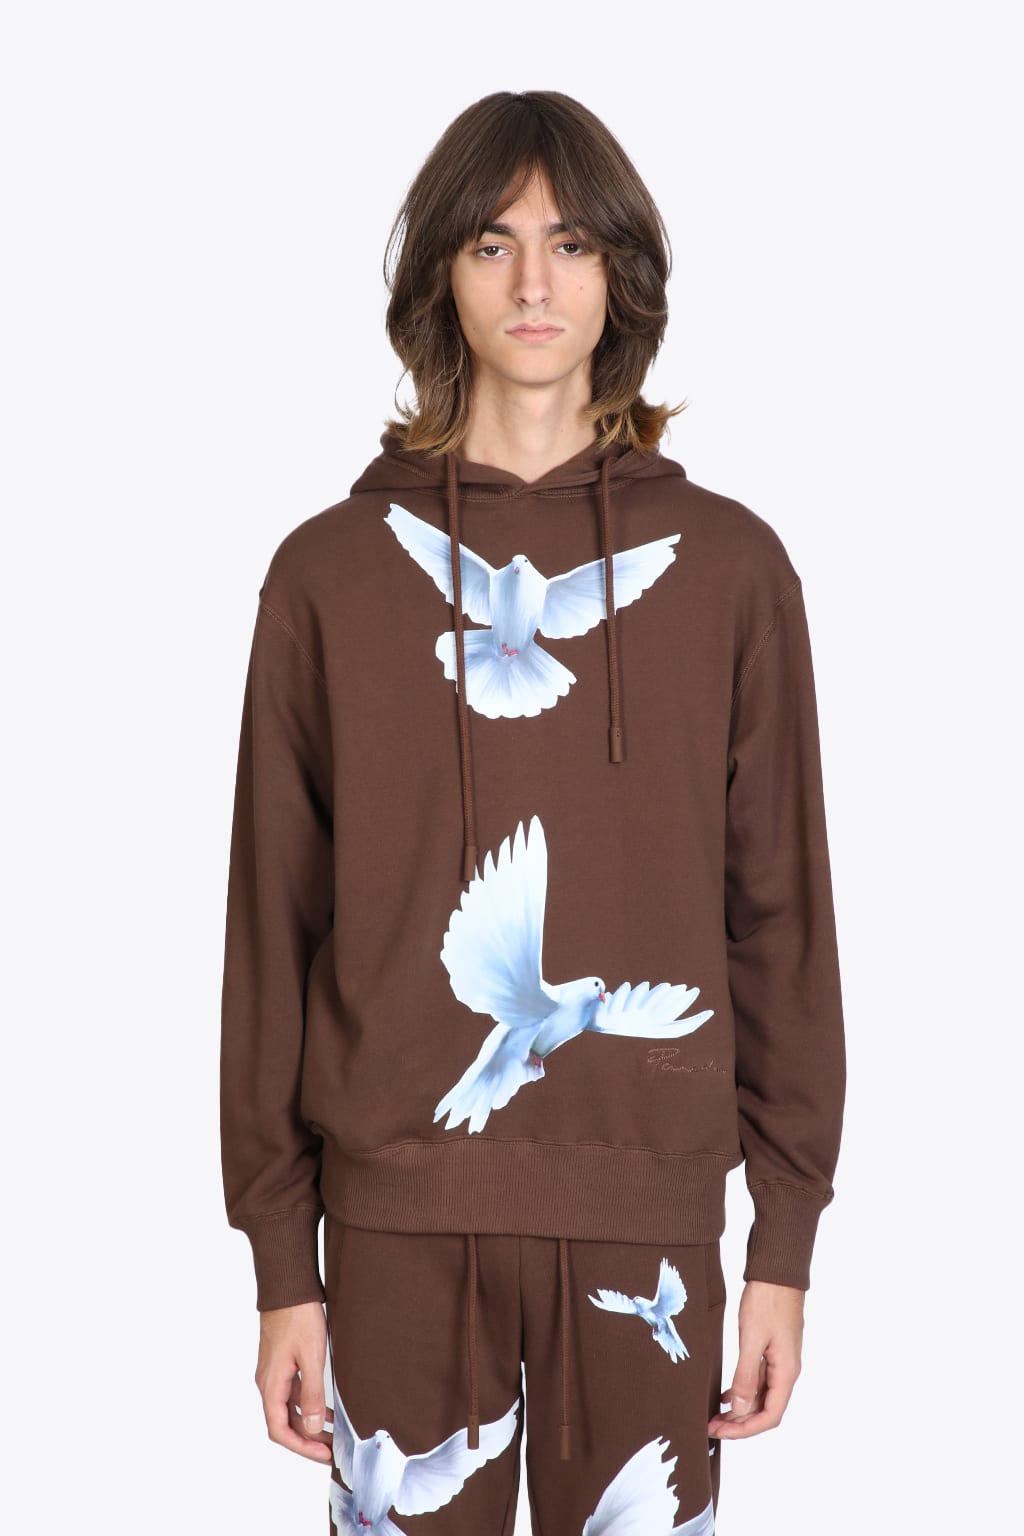 3.Paradis Sweater Brown cotton hoodie with dove prints.